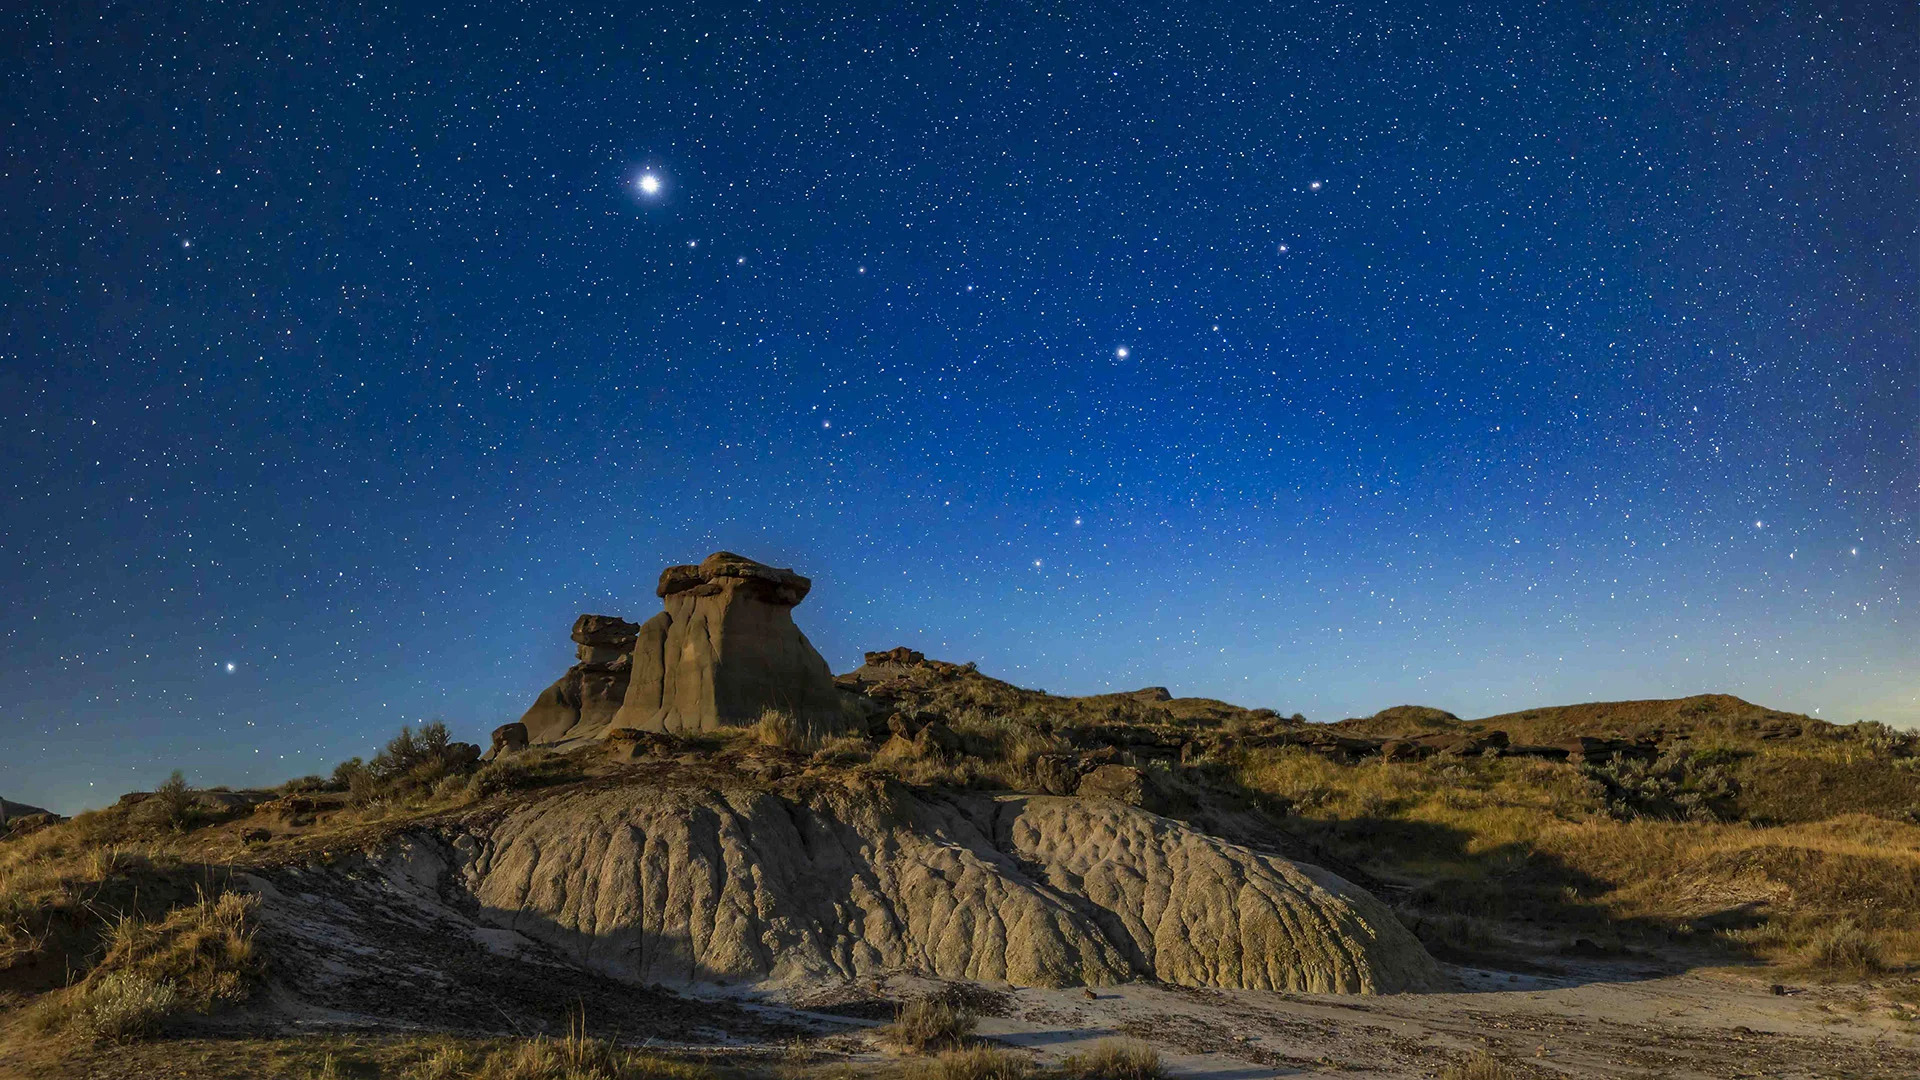  Jupiter (bright at left) and Saturn (dimmer at centre) over hoodoo formations at Dinosaur Provincial Park, Alberta, August 29/30, 2021, with the foreground illuminated by moonlight from the rising last quarter Moon. The planets are in or near the constellation of Capricornus framed at centre. This is a blend of two images: a single tracked 1-minute exposure for the sky at f/2.8 and ISO 800 plus a single untracked 3-minute exposure for the ground at f/4 and ISO 800, both with the Canon 15-35mm RF lens at 29mm and Canon R6 camera on the Star Adventurer Mini tracker. I added a mild Orton effect with Luminar AI. Long Exposure Noise Reduction applied to the ground image in camera. (Photo by: Alan Dyer/VW Pics/Universal Images Group via Getty Images). 